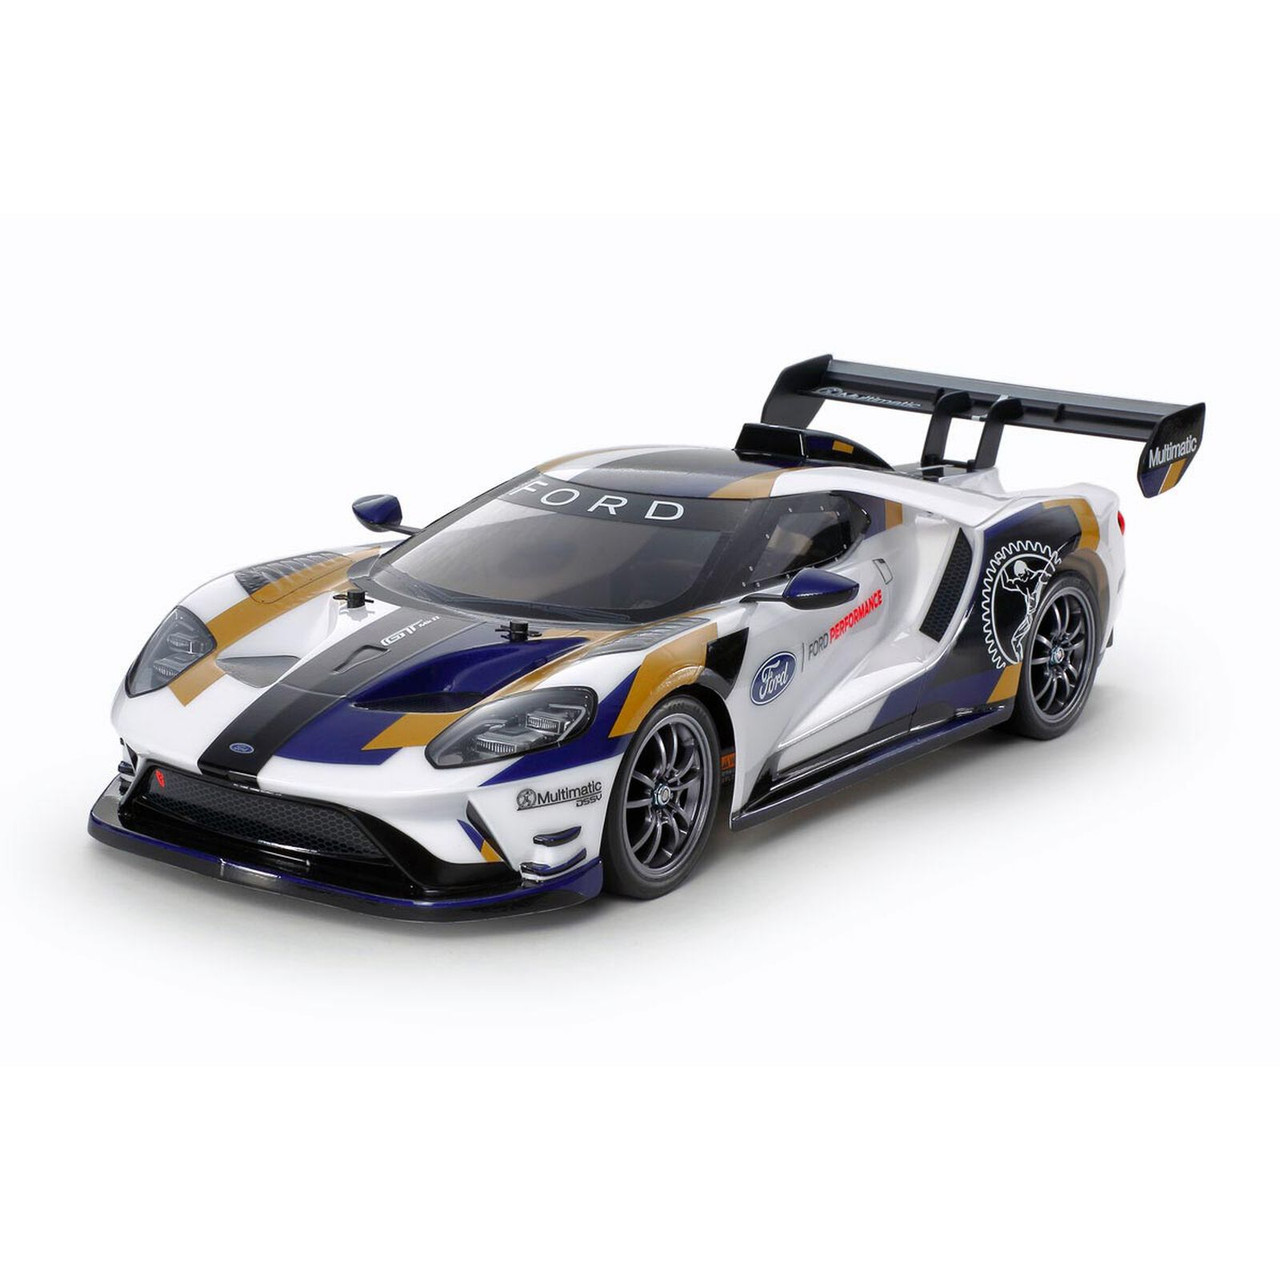 Paint Requirements for the 24346 Ford GT / Tamiya USA